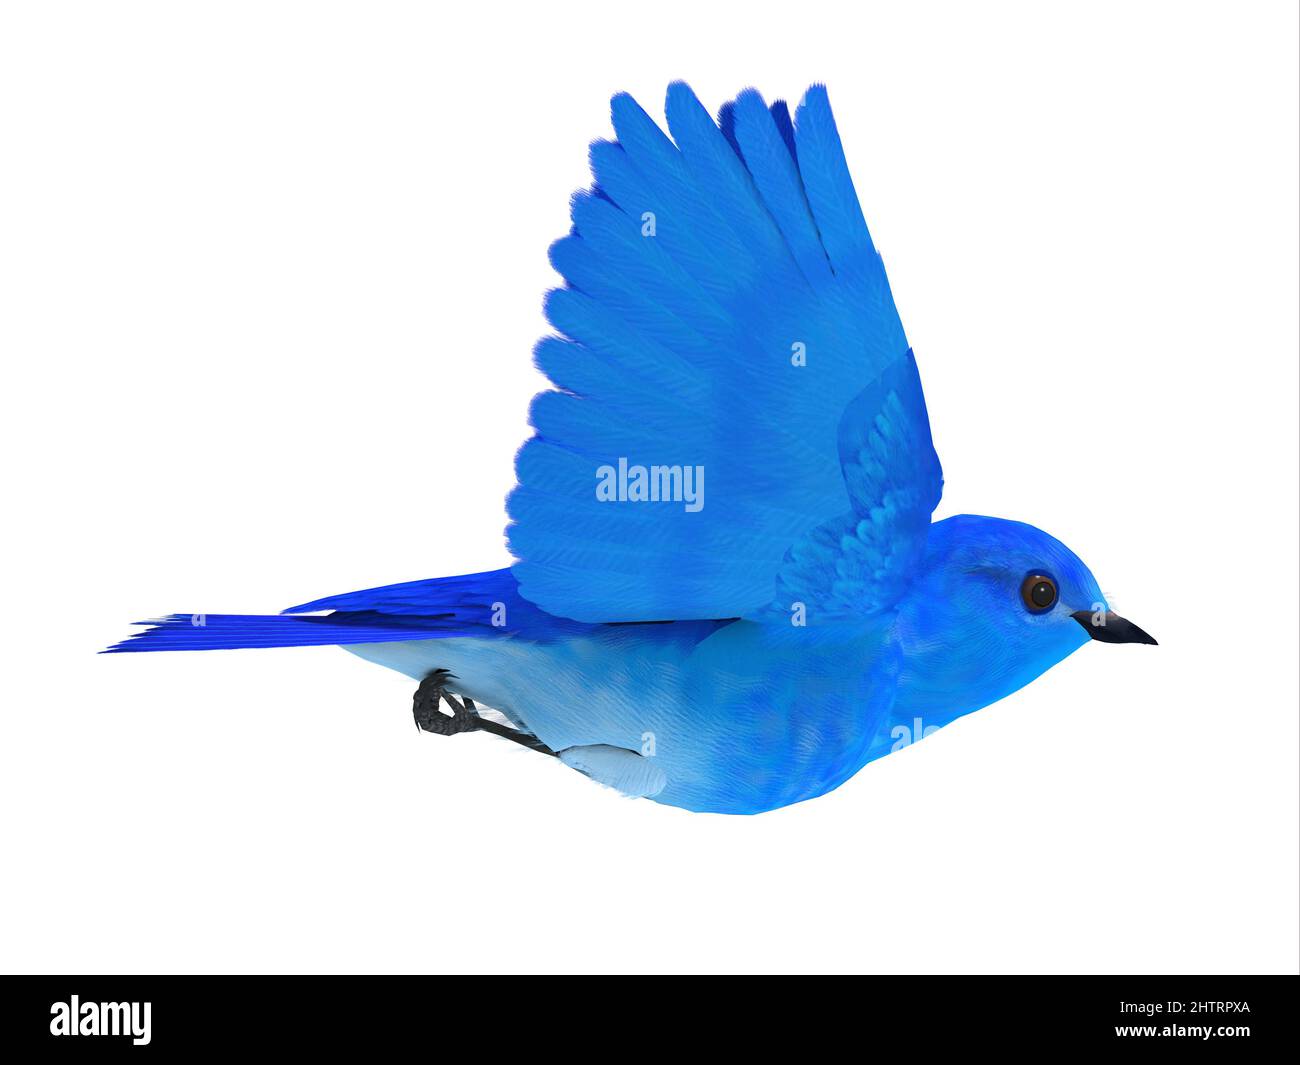 The Bluebird of Happiness is a symbol of joy and looking forward to better times in the future. Stock Photo